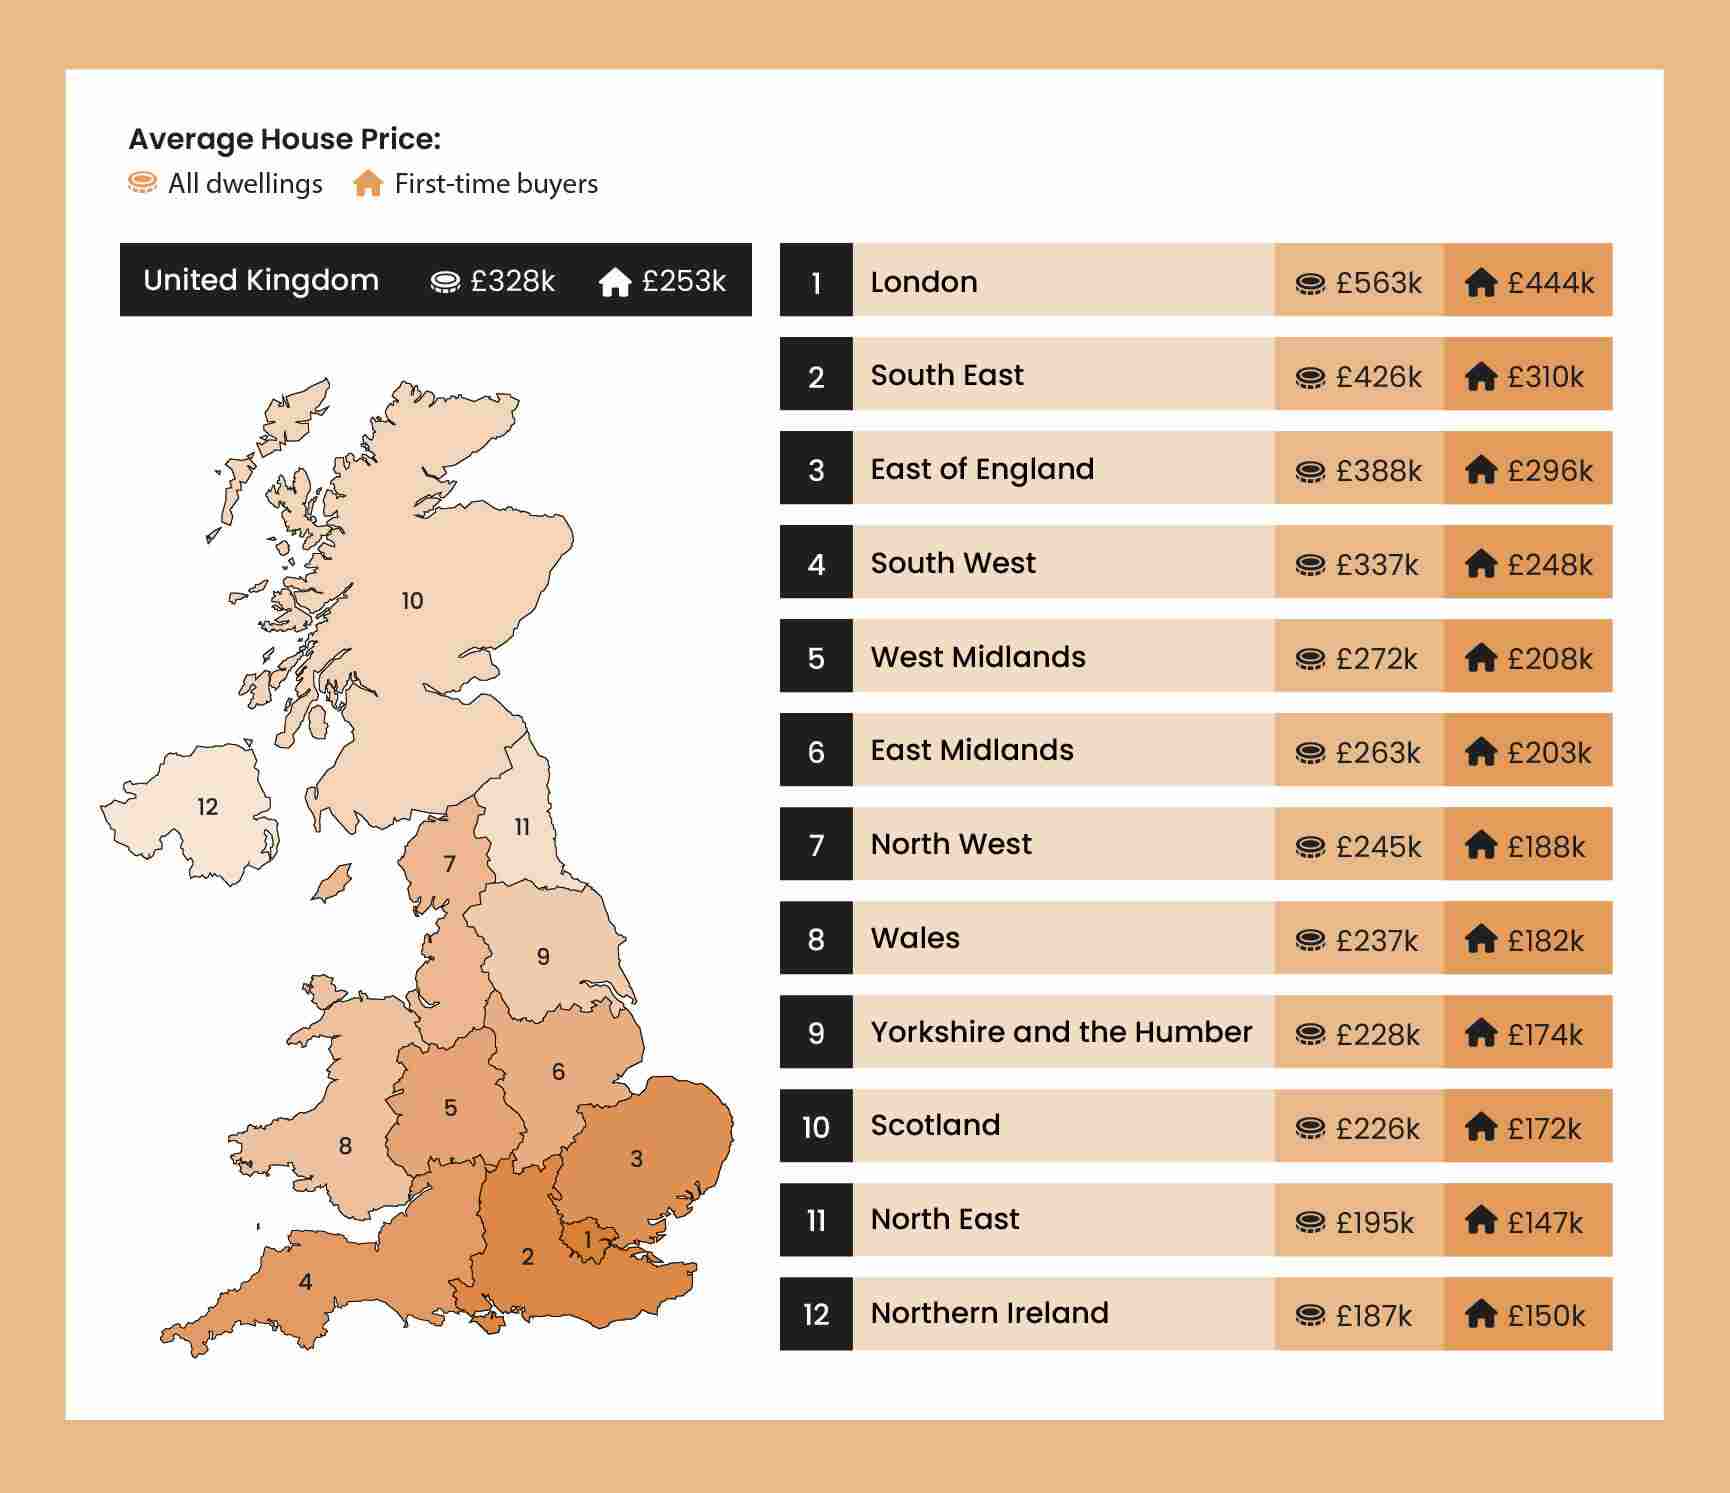 a light orange map of the UK showing the average house price for all dwellings and first-time buyers by region